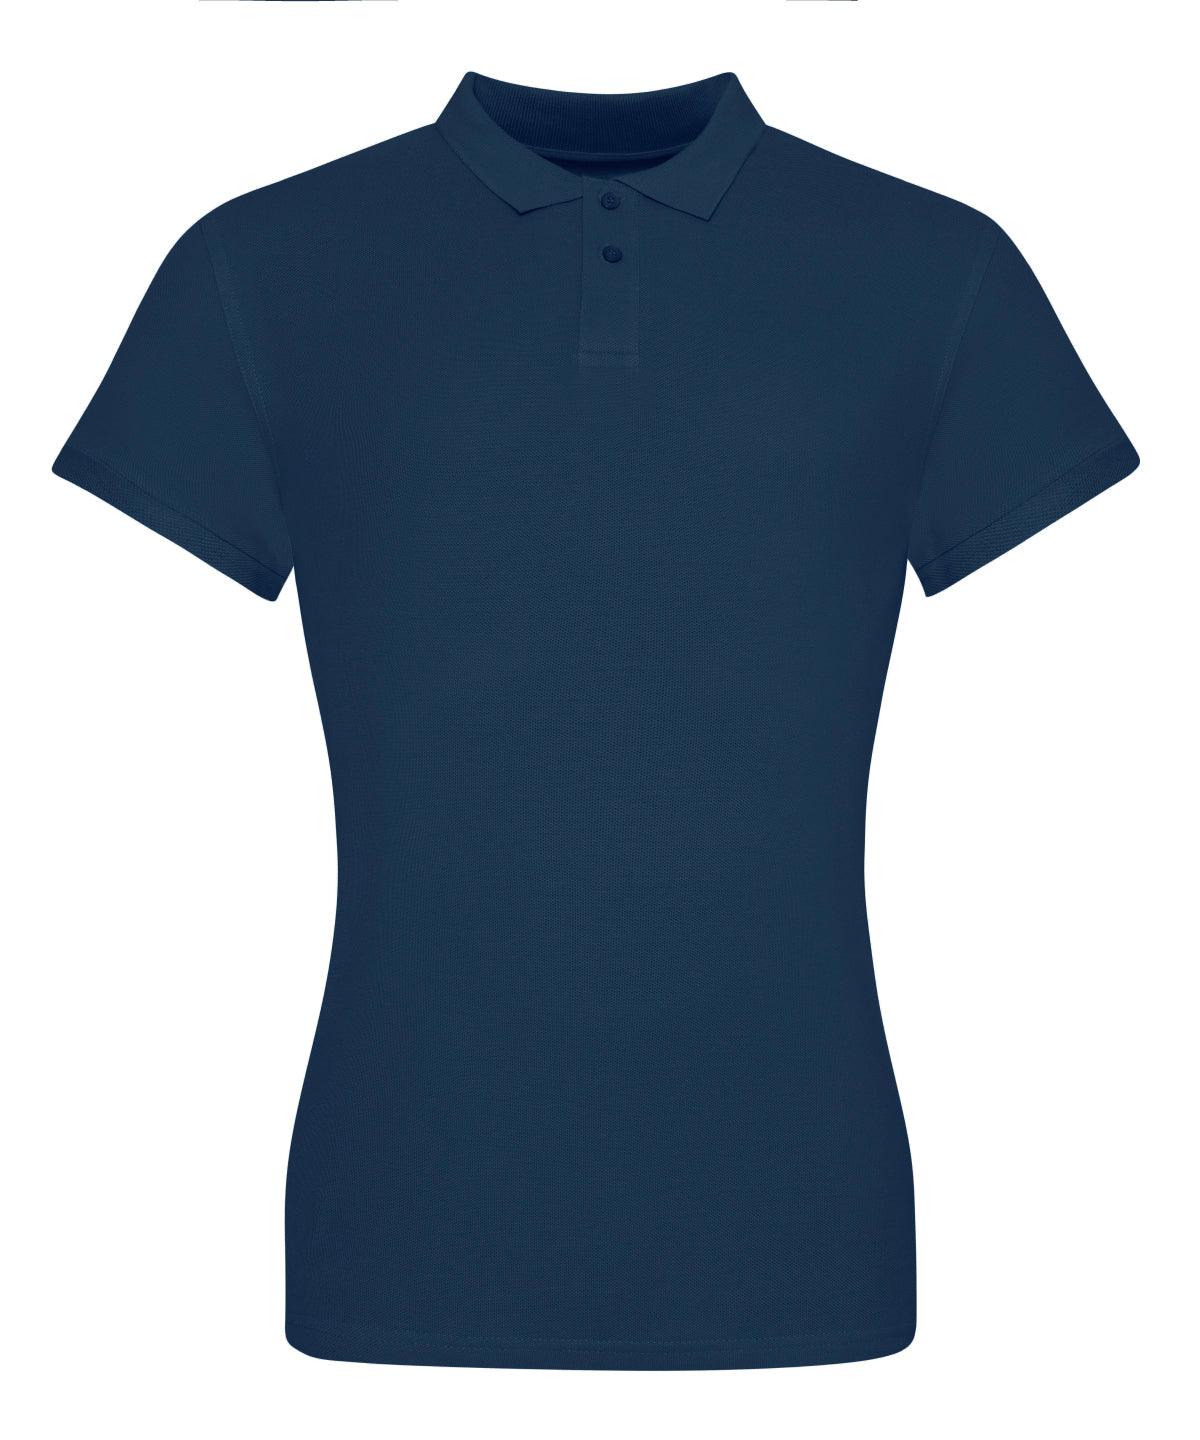 Personalised Polo Shirts - Burgundy AWDis Just Polo's The 100 women's polo